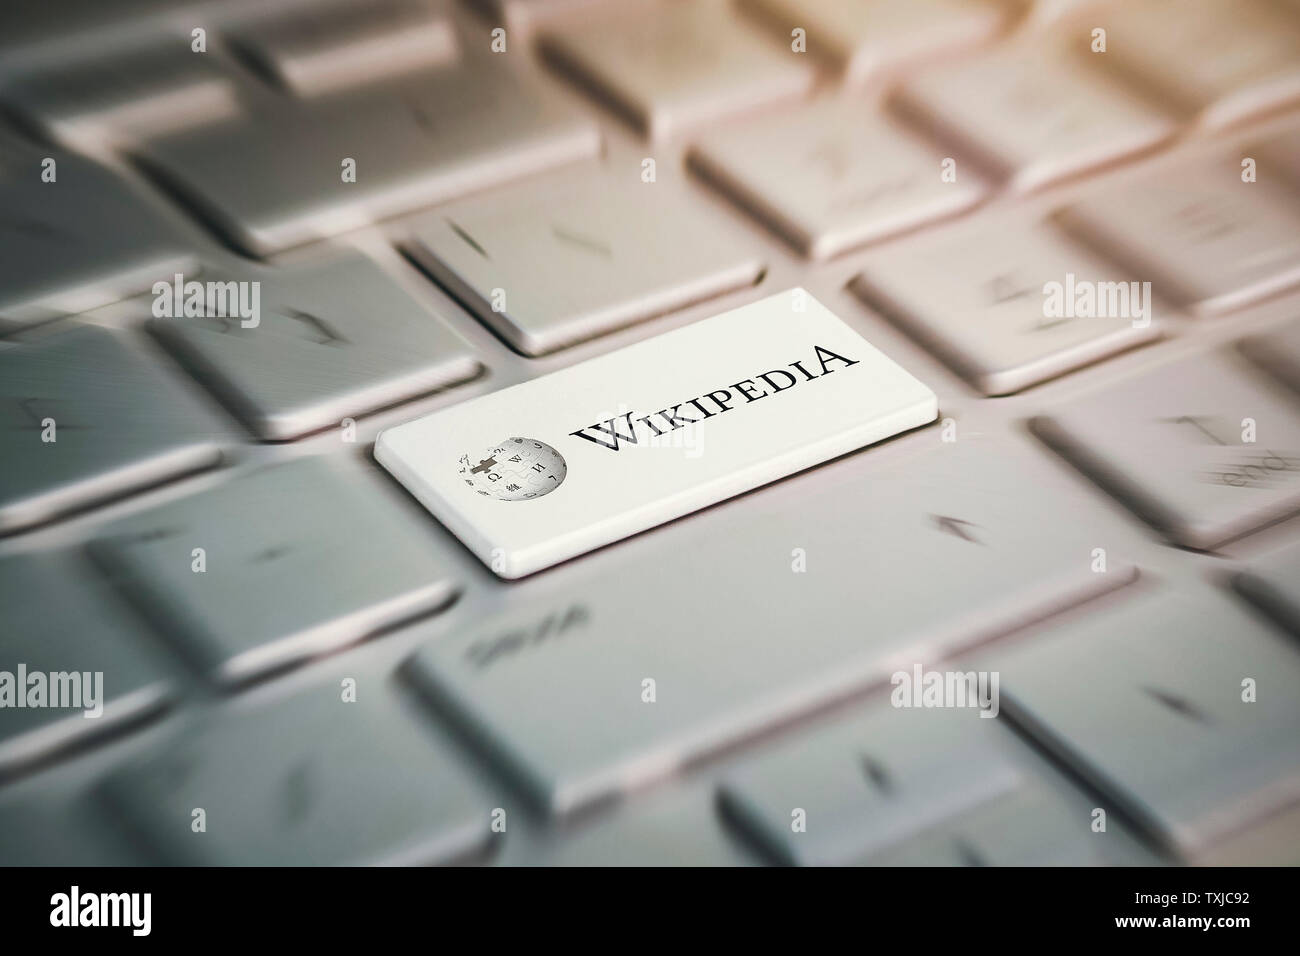 3 June 2018. Barnaul city. Russia. button with the company logo Wikipedia on the grey keyboard of a modern laptop. Stock Photo